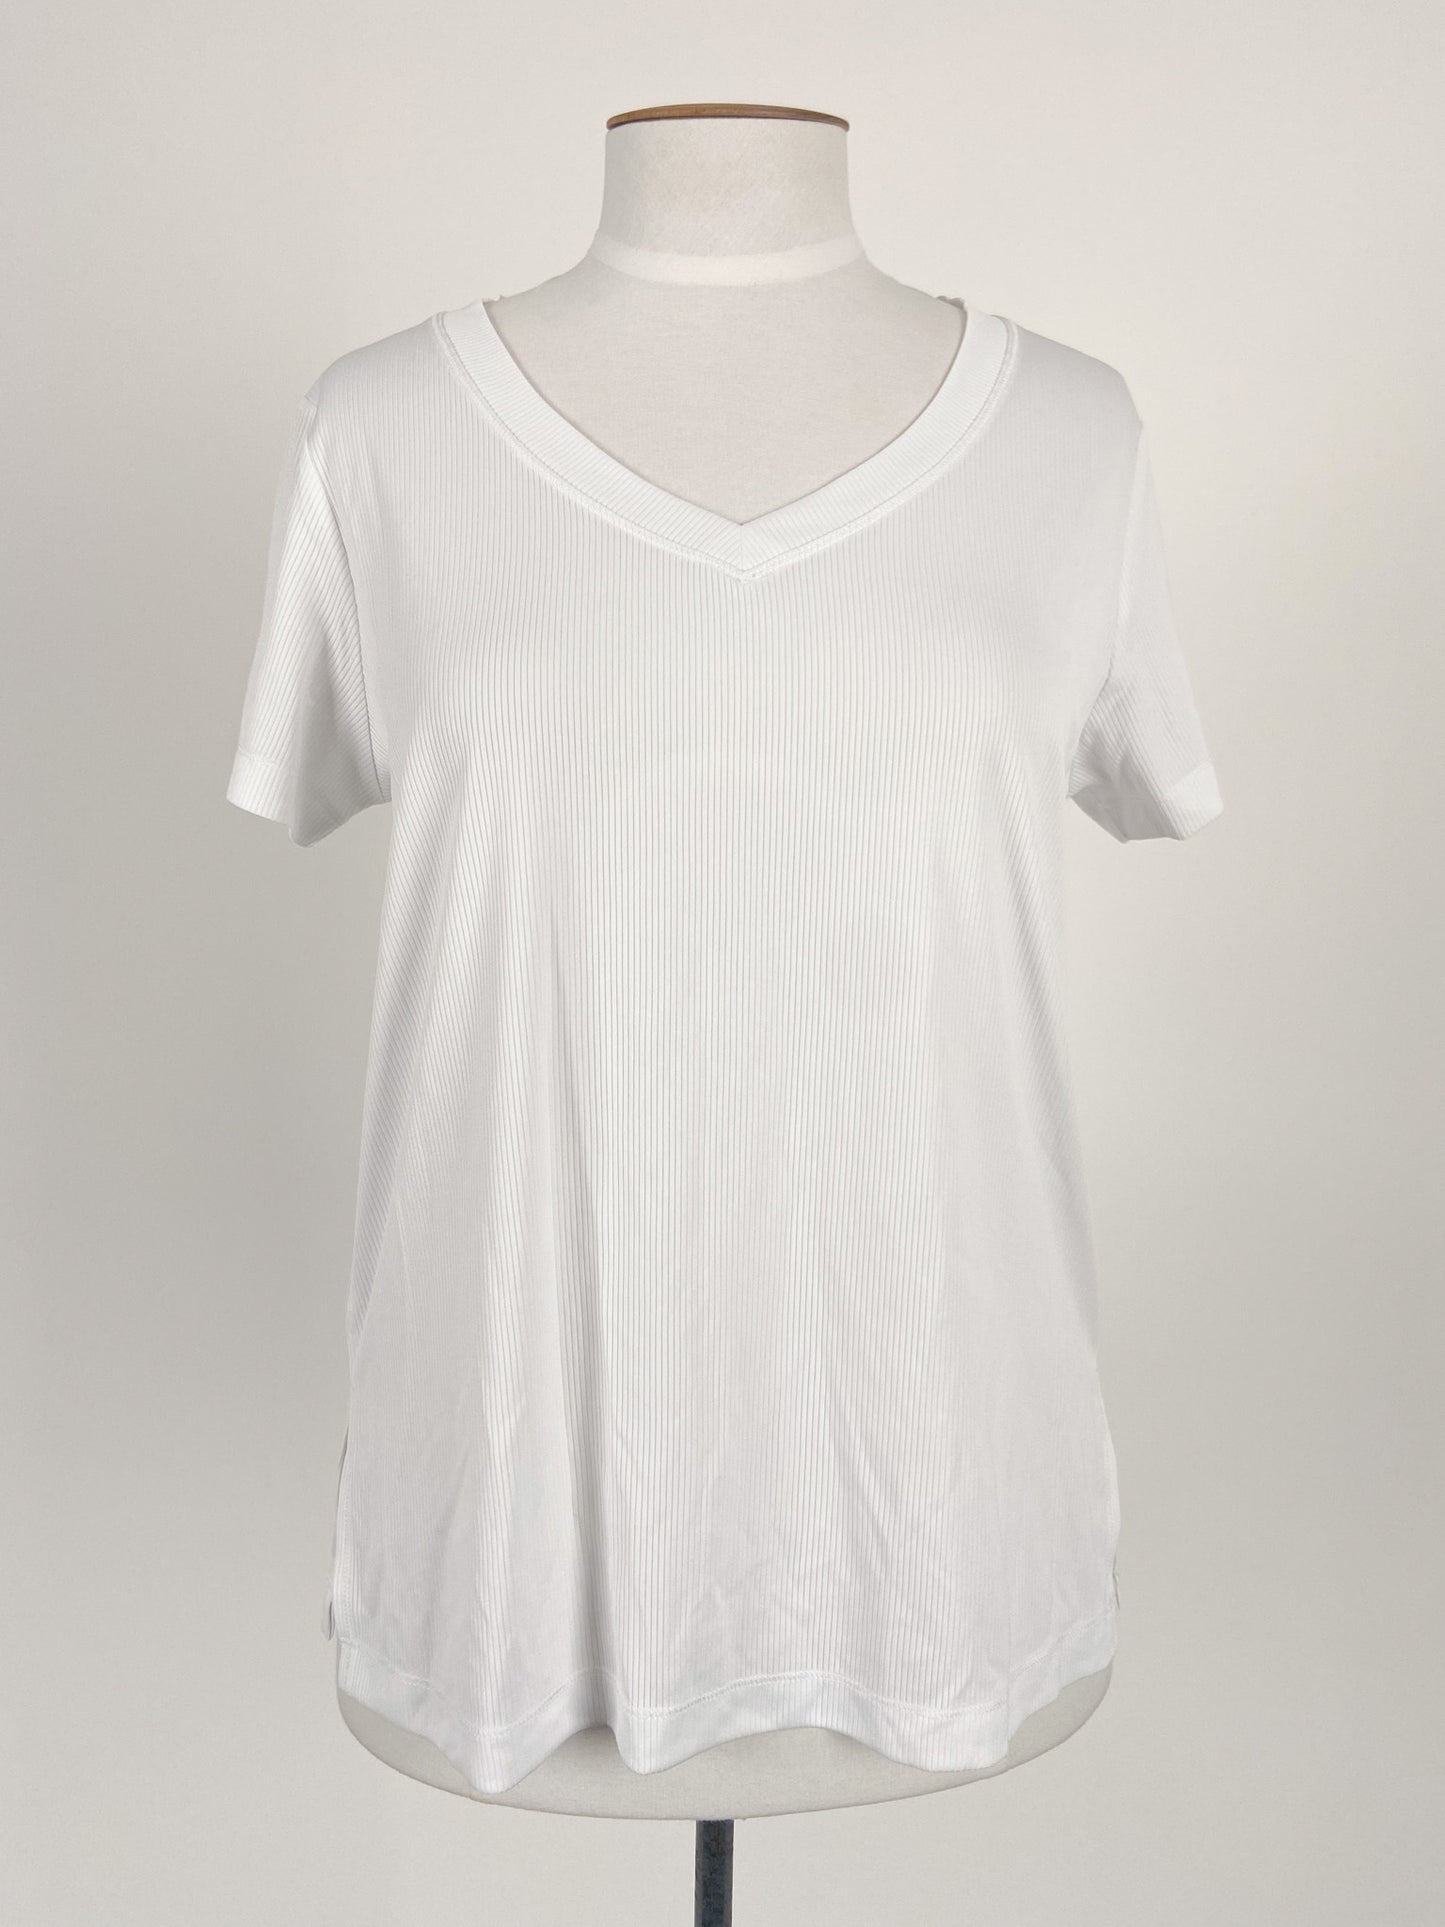 Lorna Jane | White Casual Top | Size S